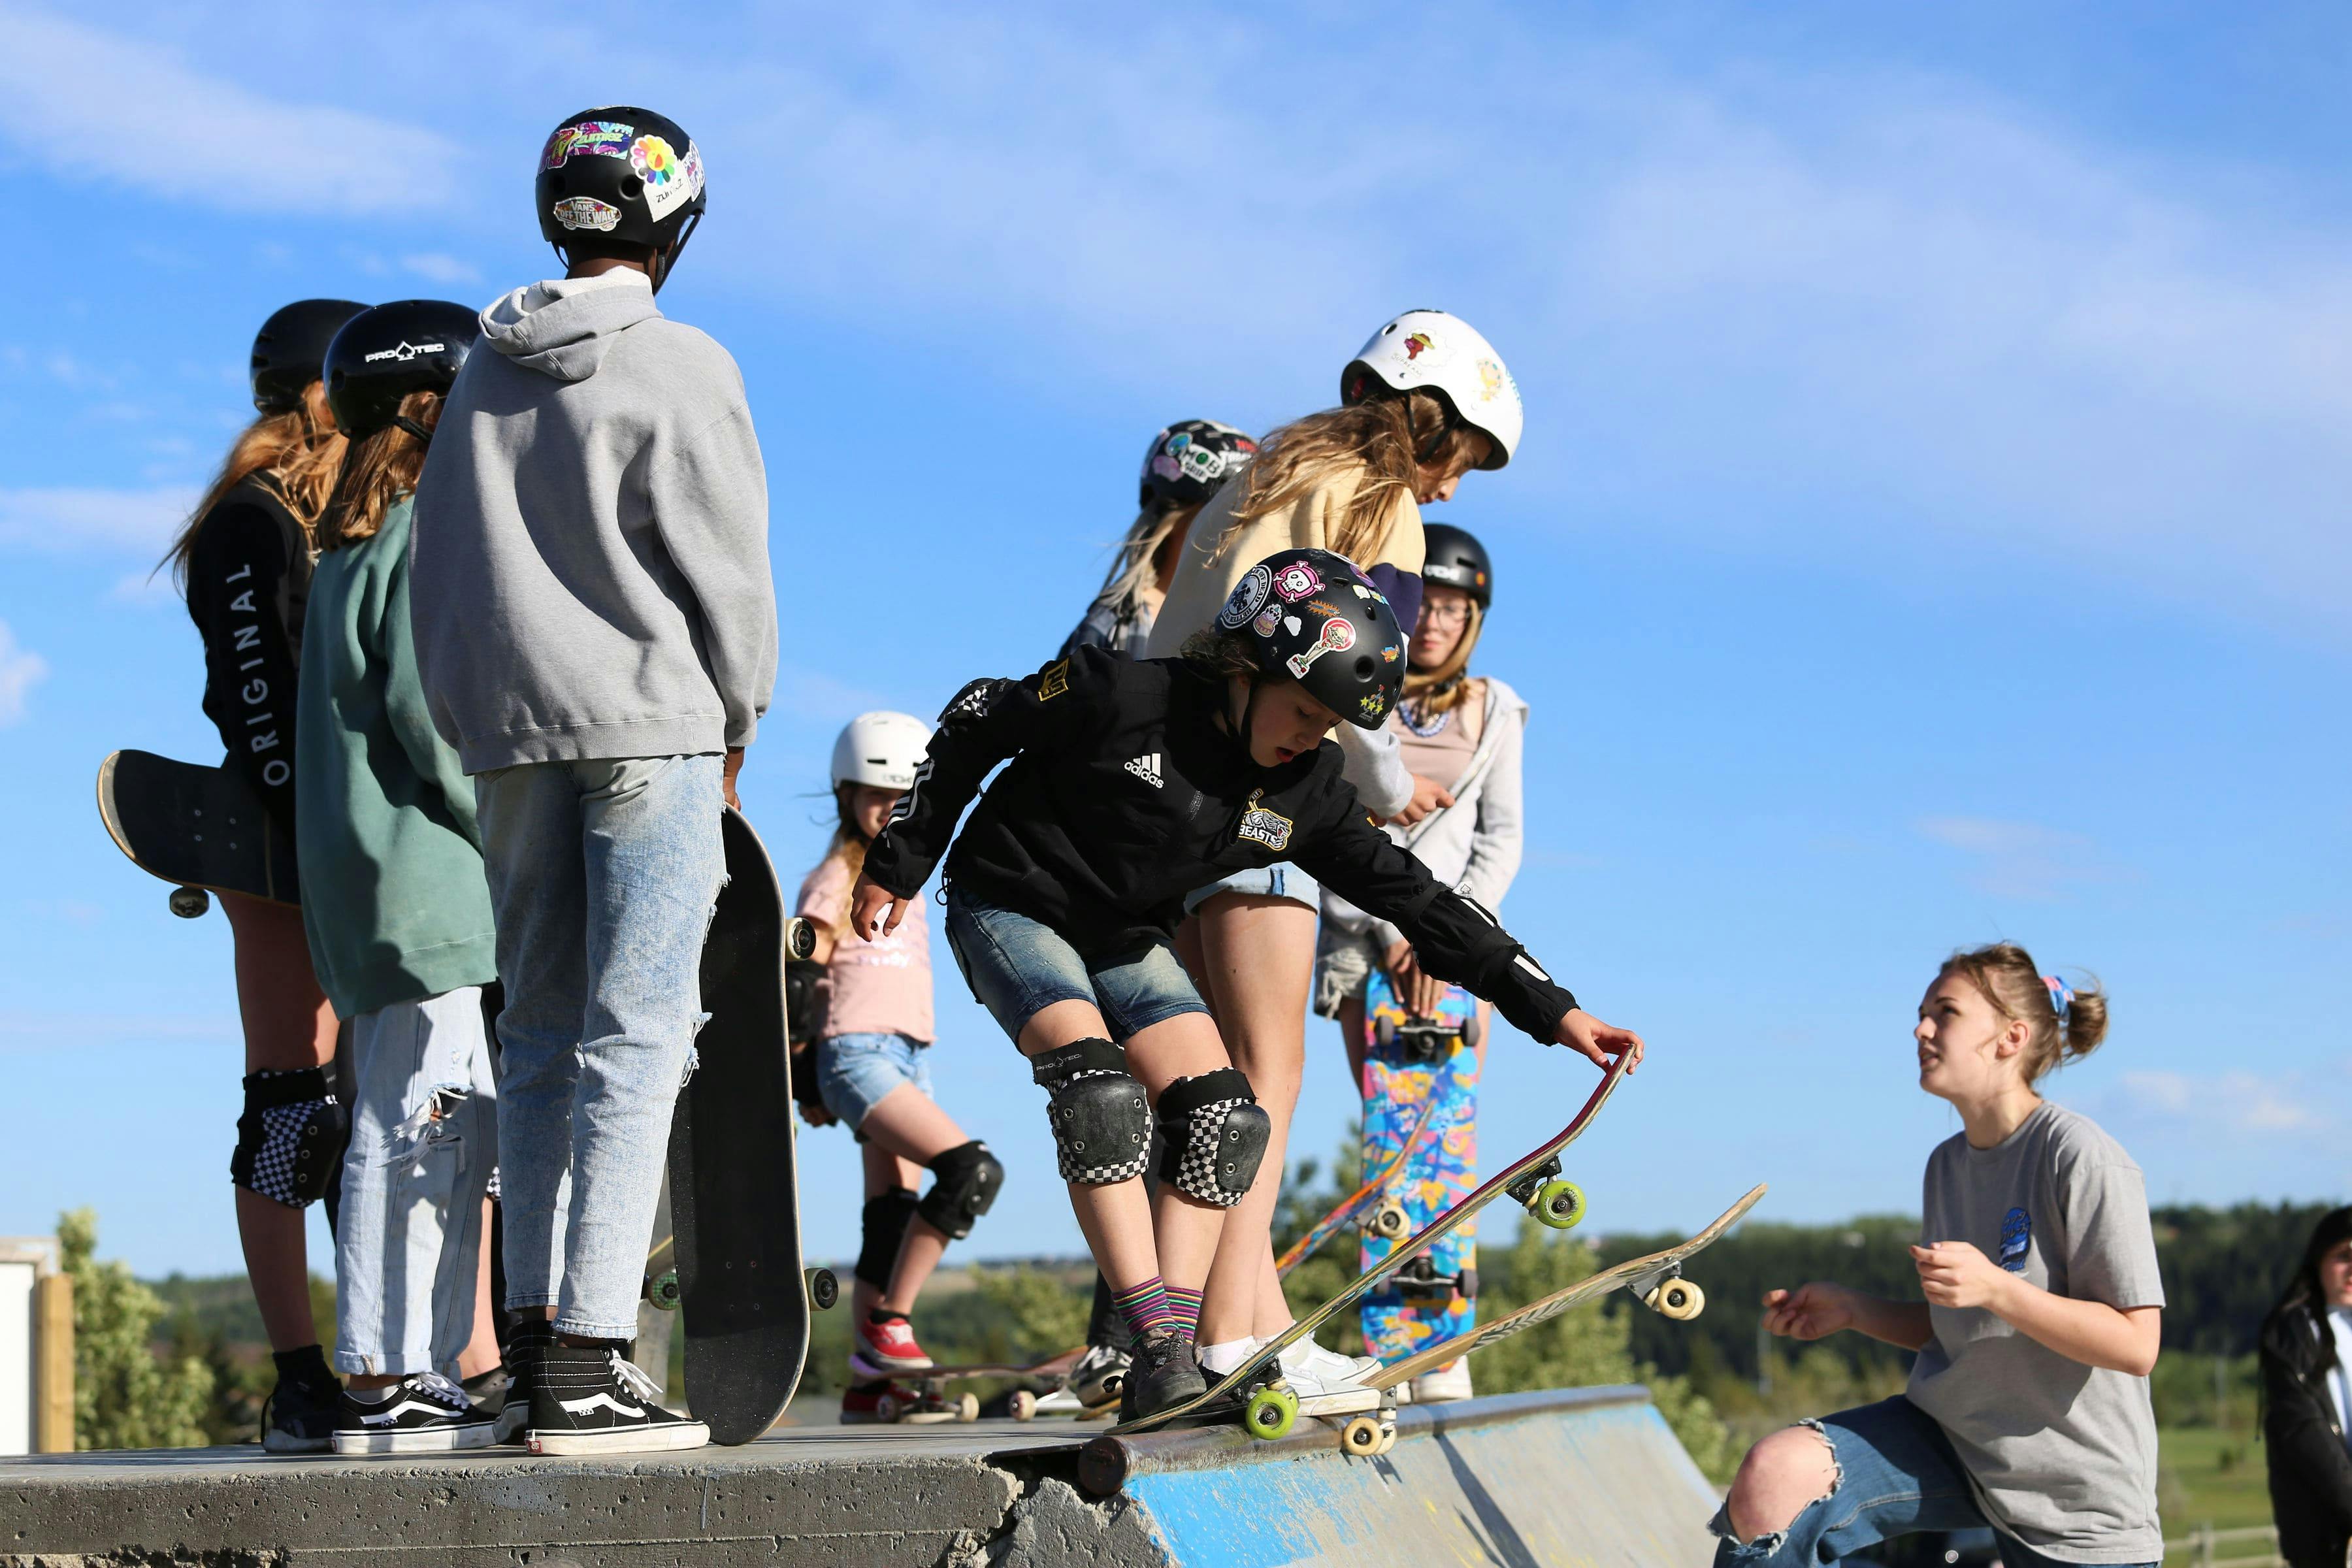 A volunteer helping girls learn to drop into the quarter pipe.